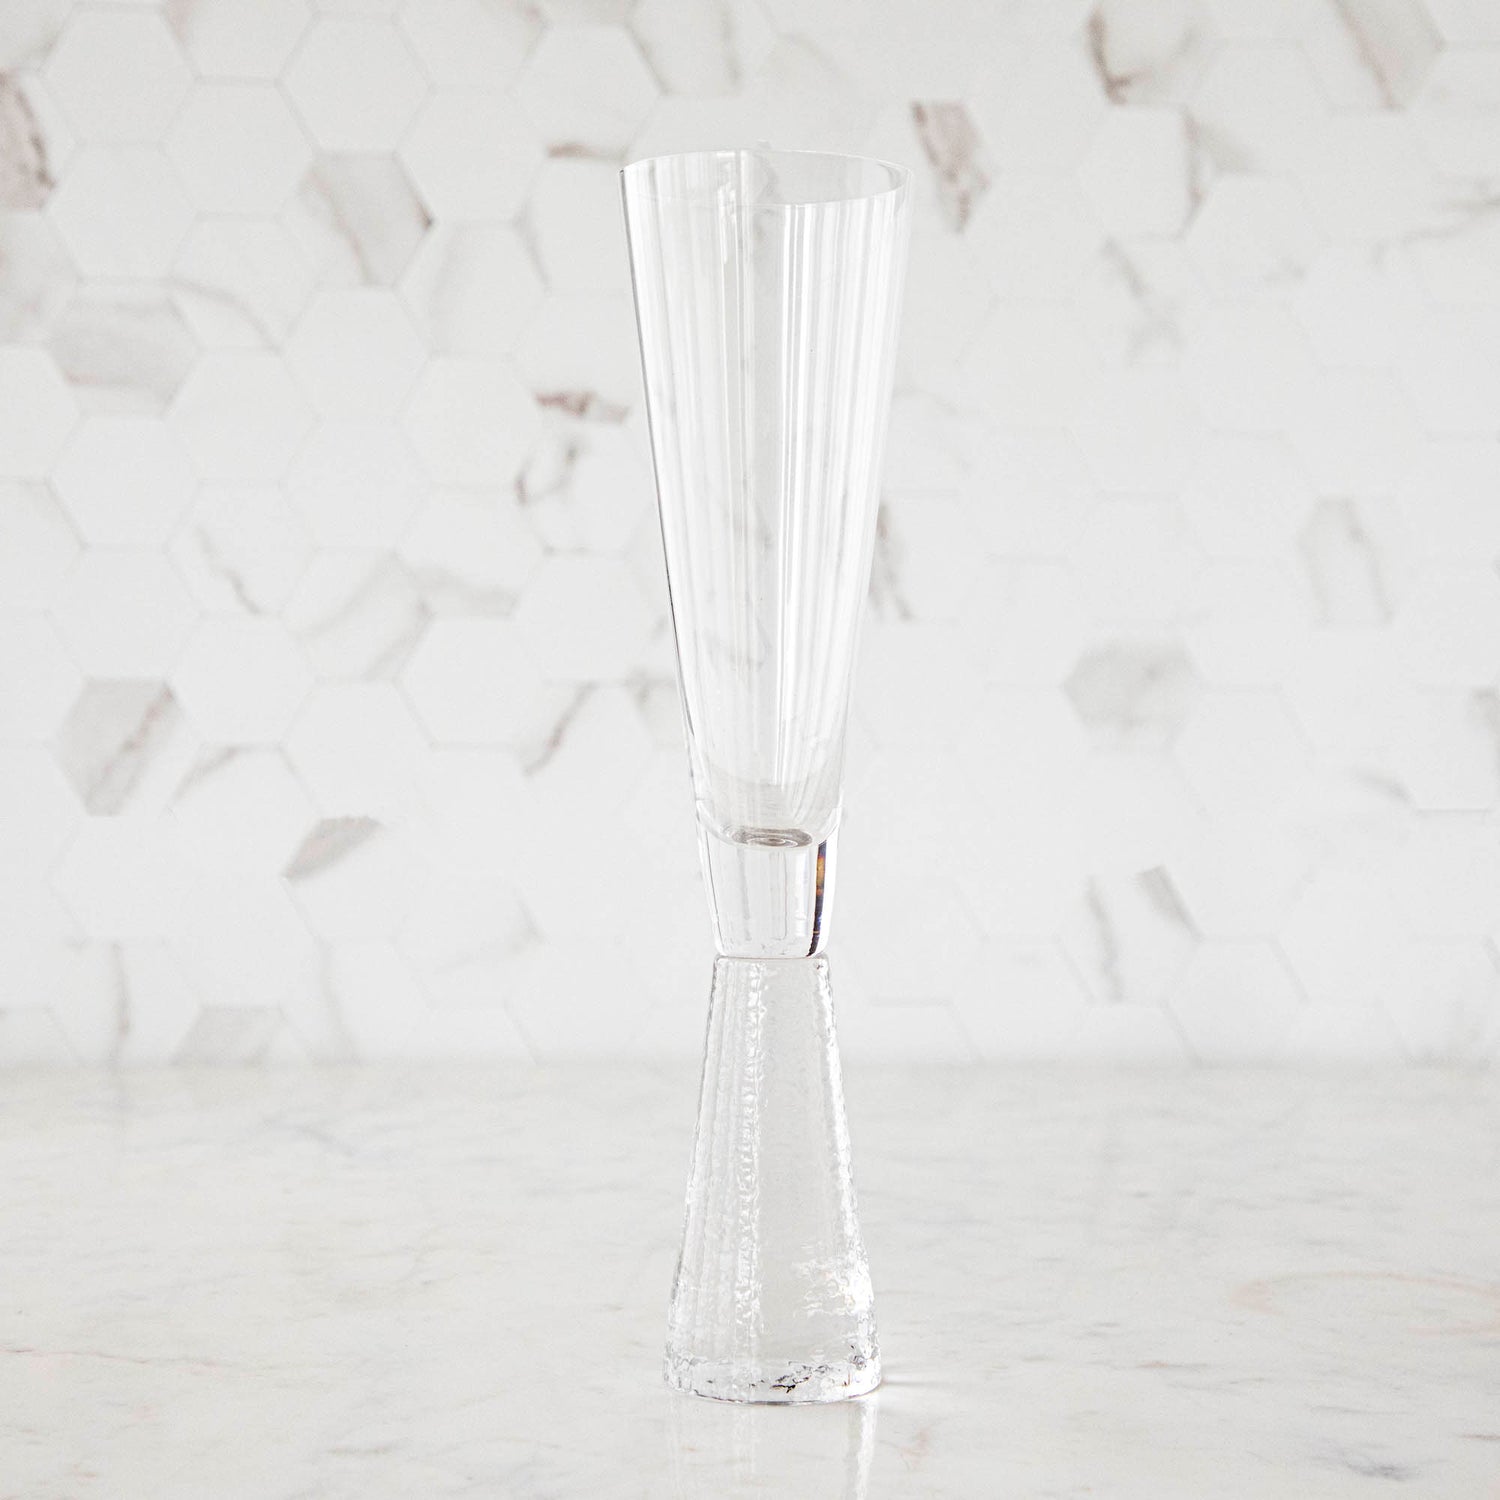 A clear Livogno Hammered Stem Glassware Champagne Flute on a white surface by Zodax.